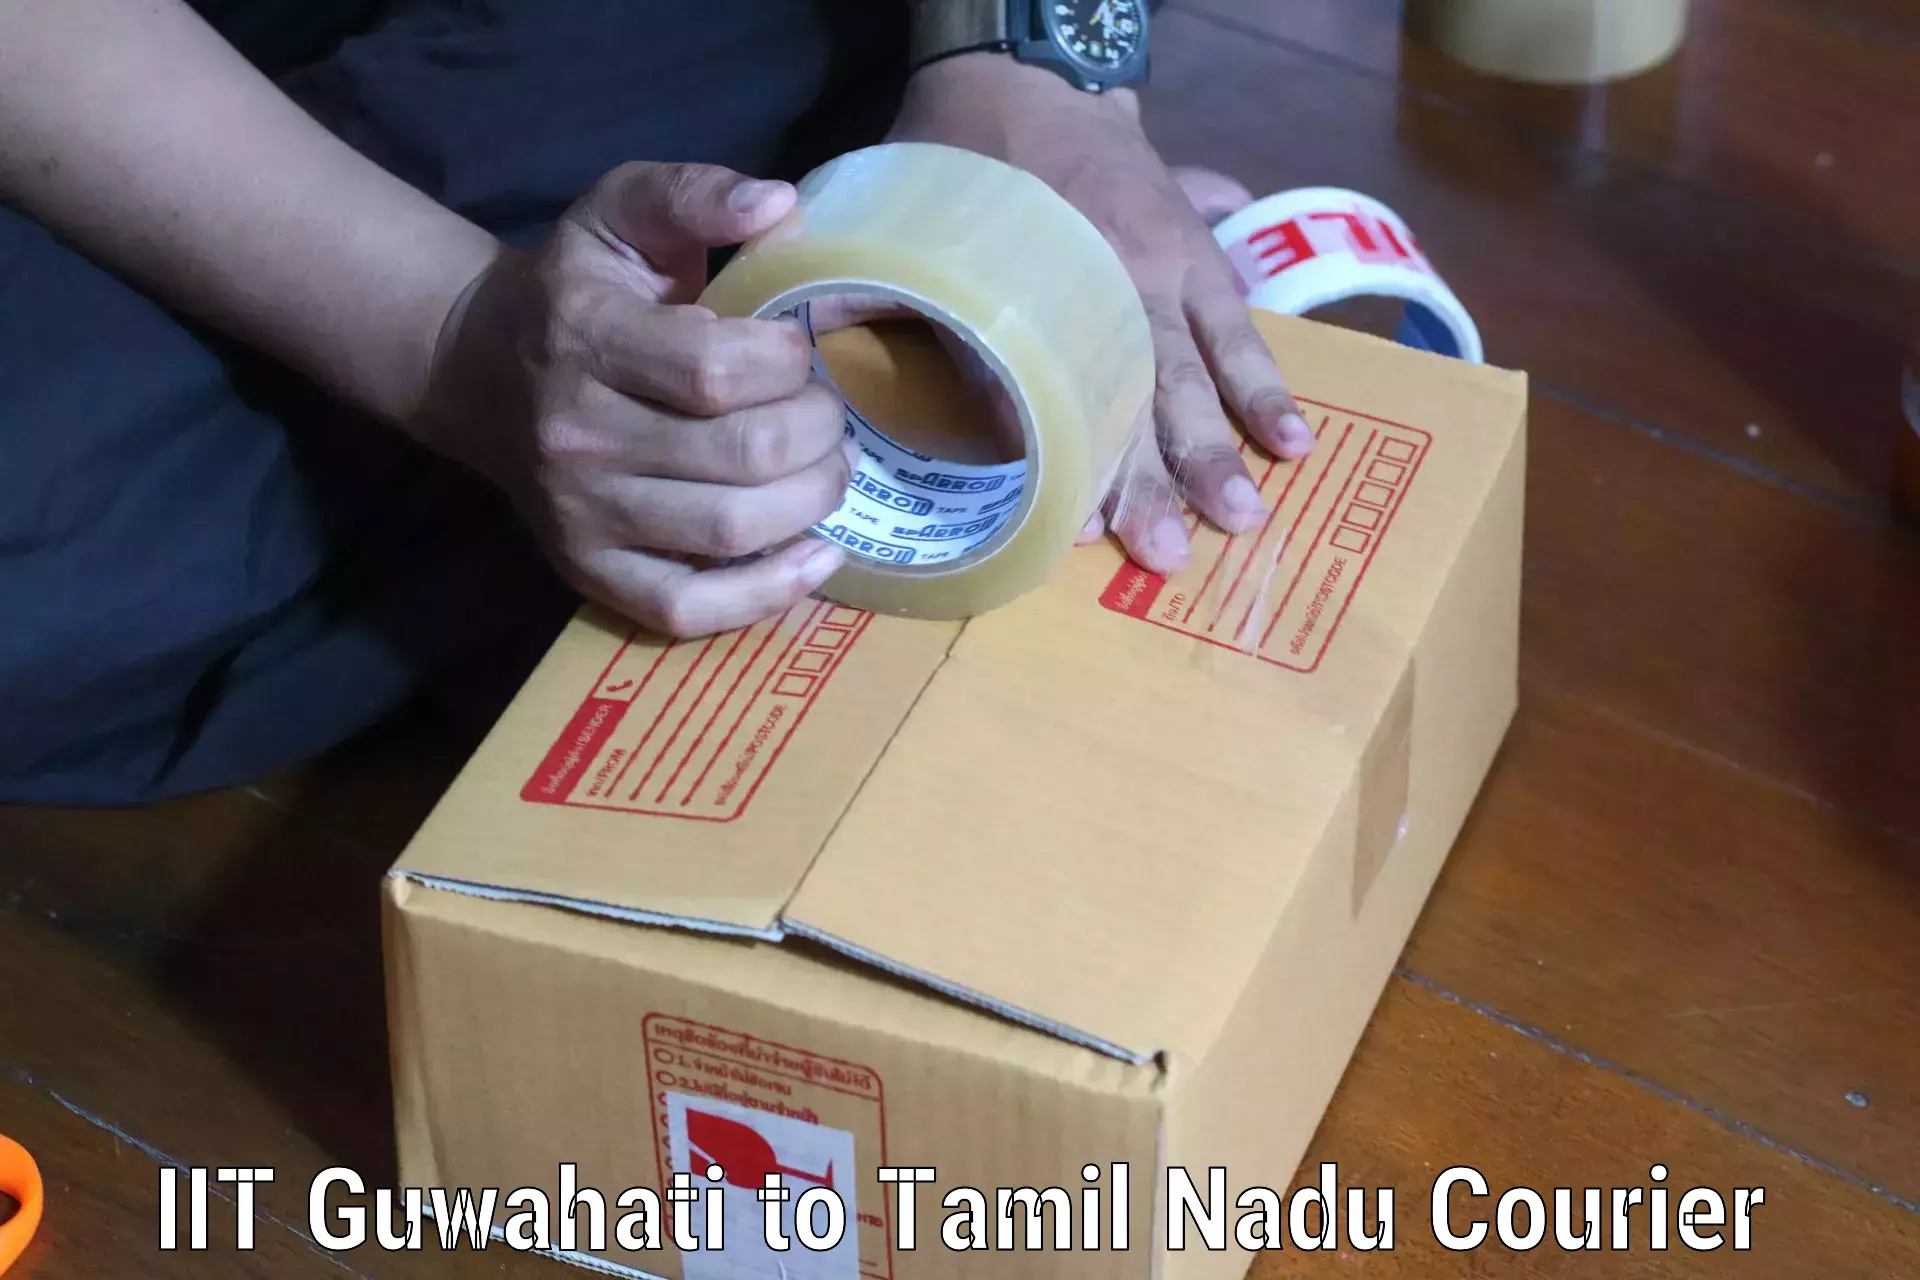 Next-day delivery options IIT Guwahati to Perambalur